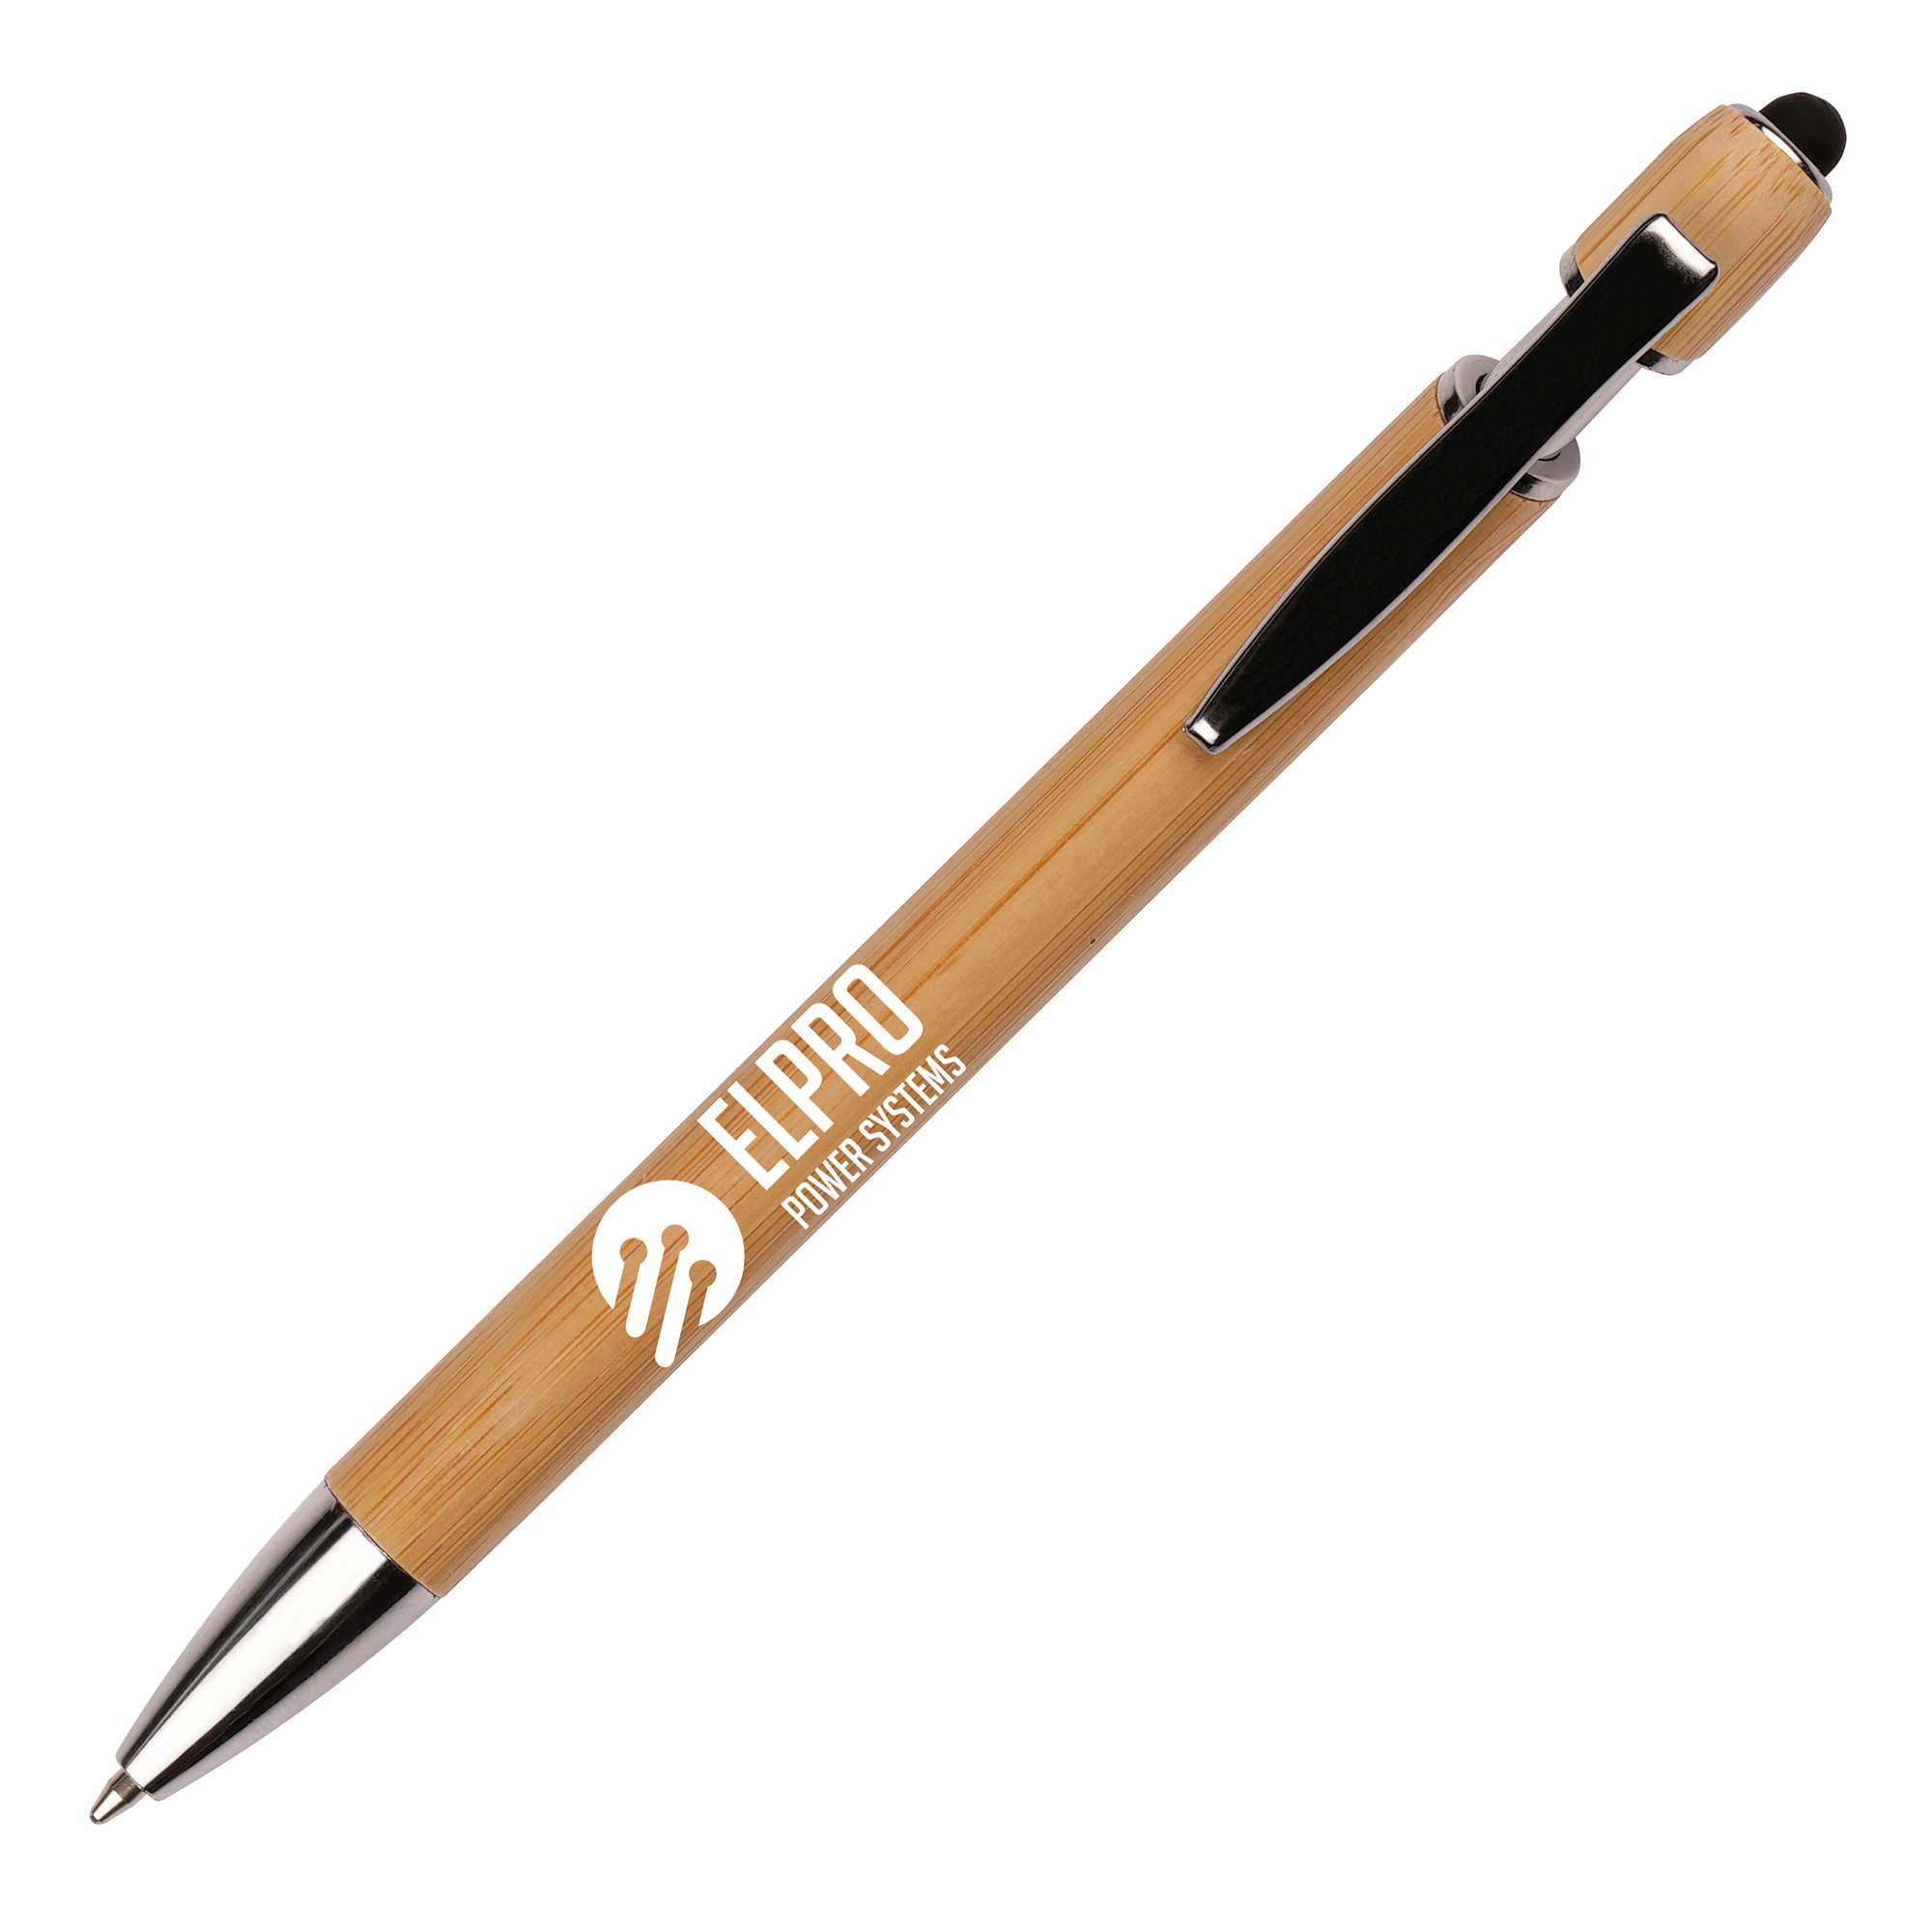 The promotional bamboo ball pen with silicone stylus, iron clip and ABS plastic trim is a stylish and versatile writing tool with added eco credentials